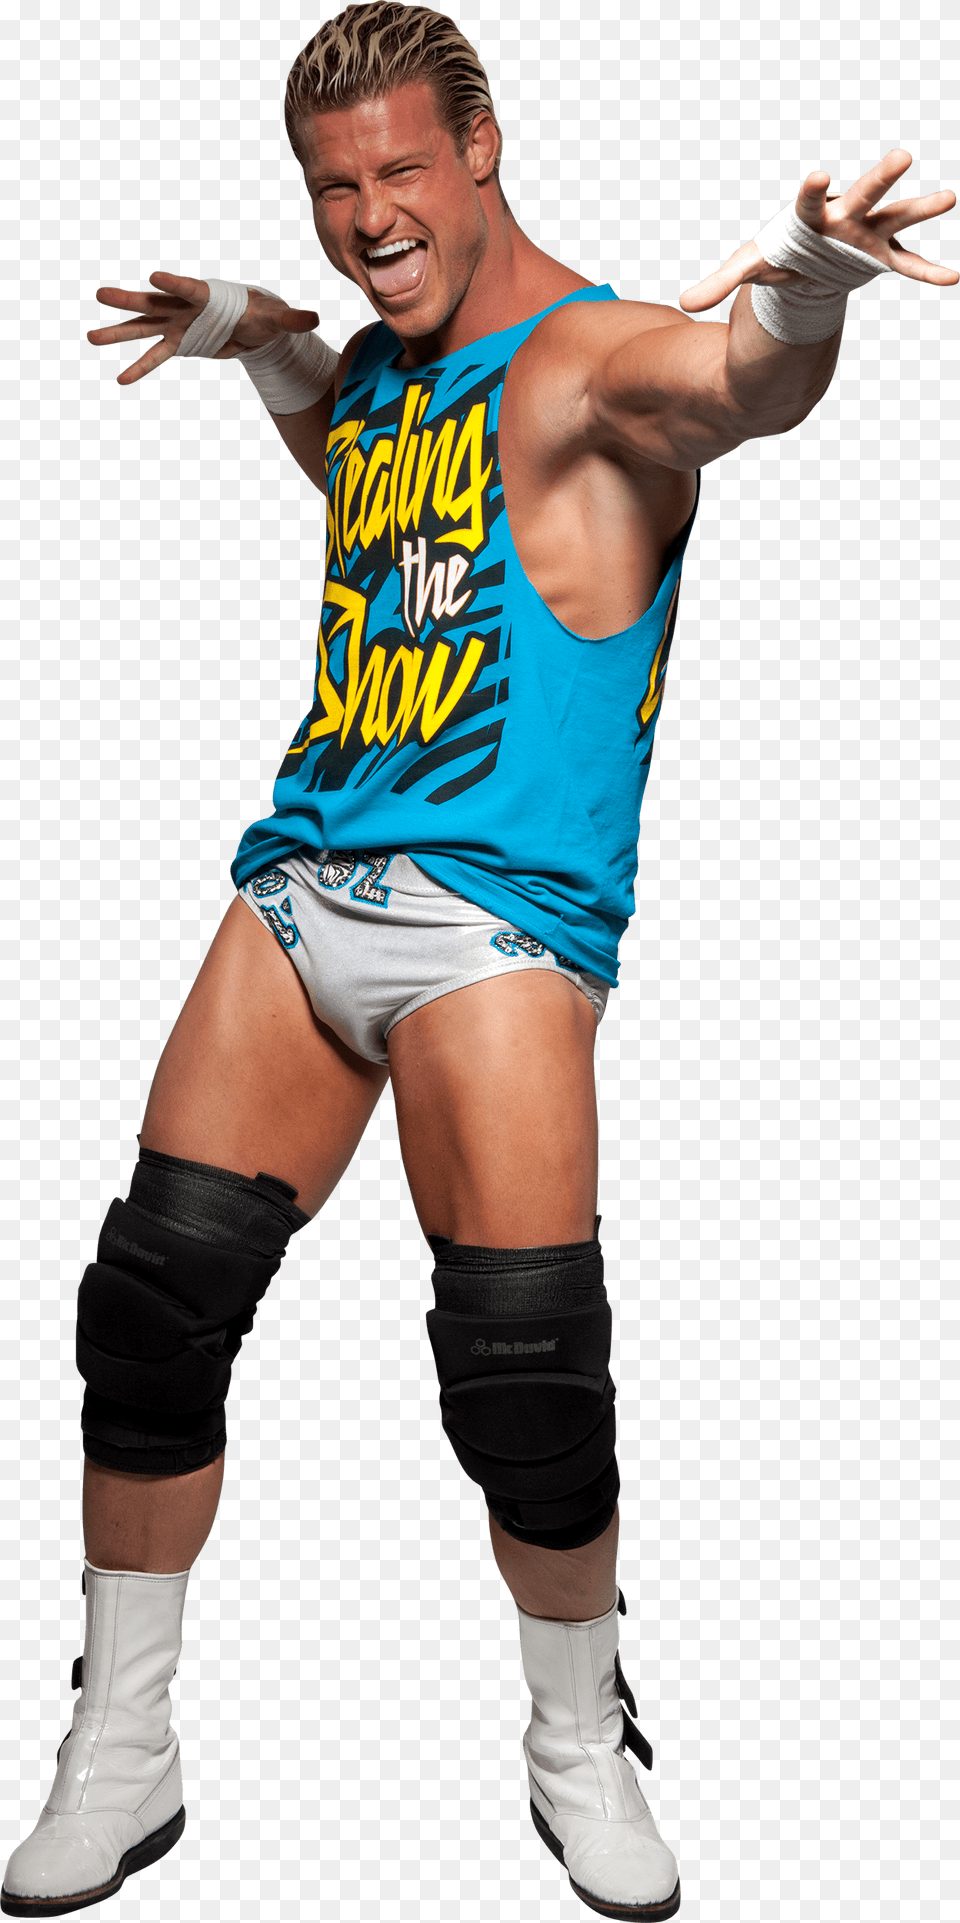 Dolph Ziggler Dance Dolph Ziggler, Body Part, Shorts, Shoe, Person Png